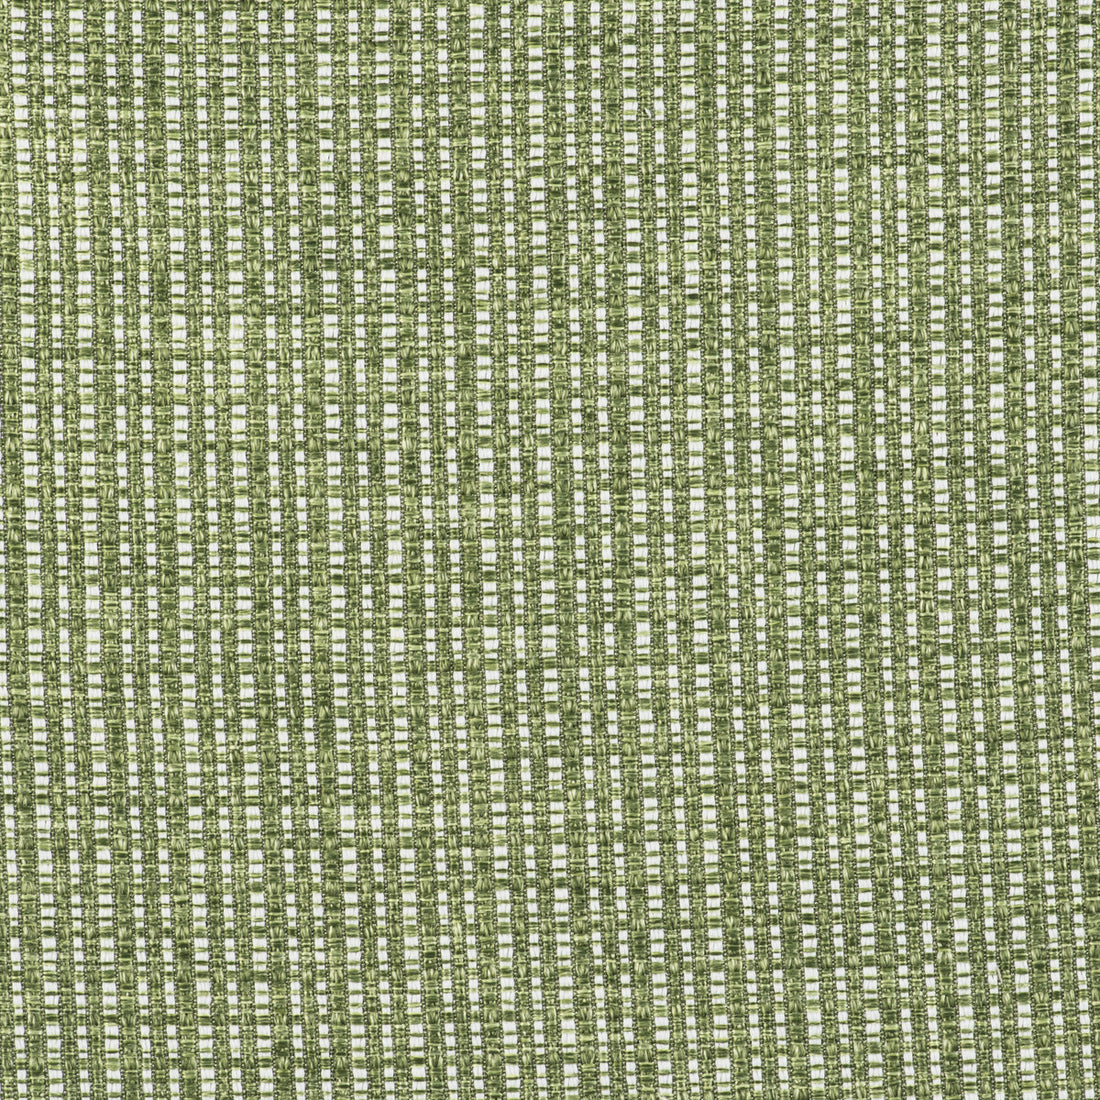 Out fabric in verde color - pattern GDT5510.006.0 - by Gaston y Daniela in the Gaston Libreria collection